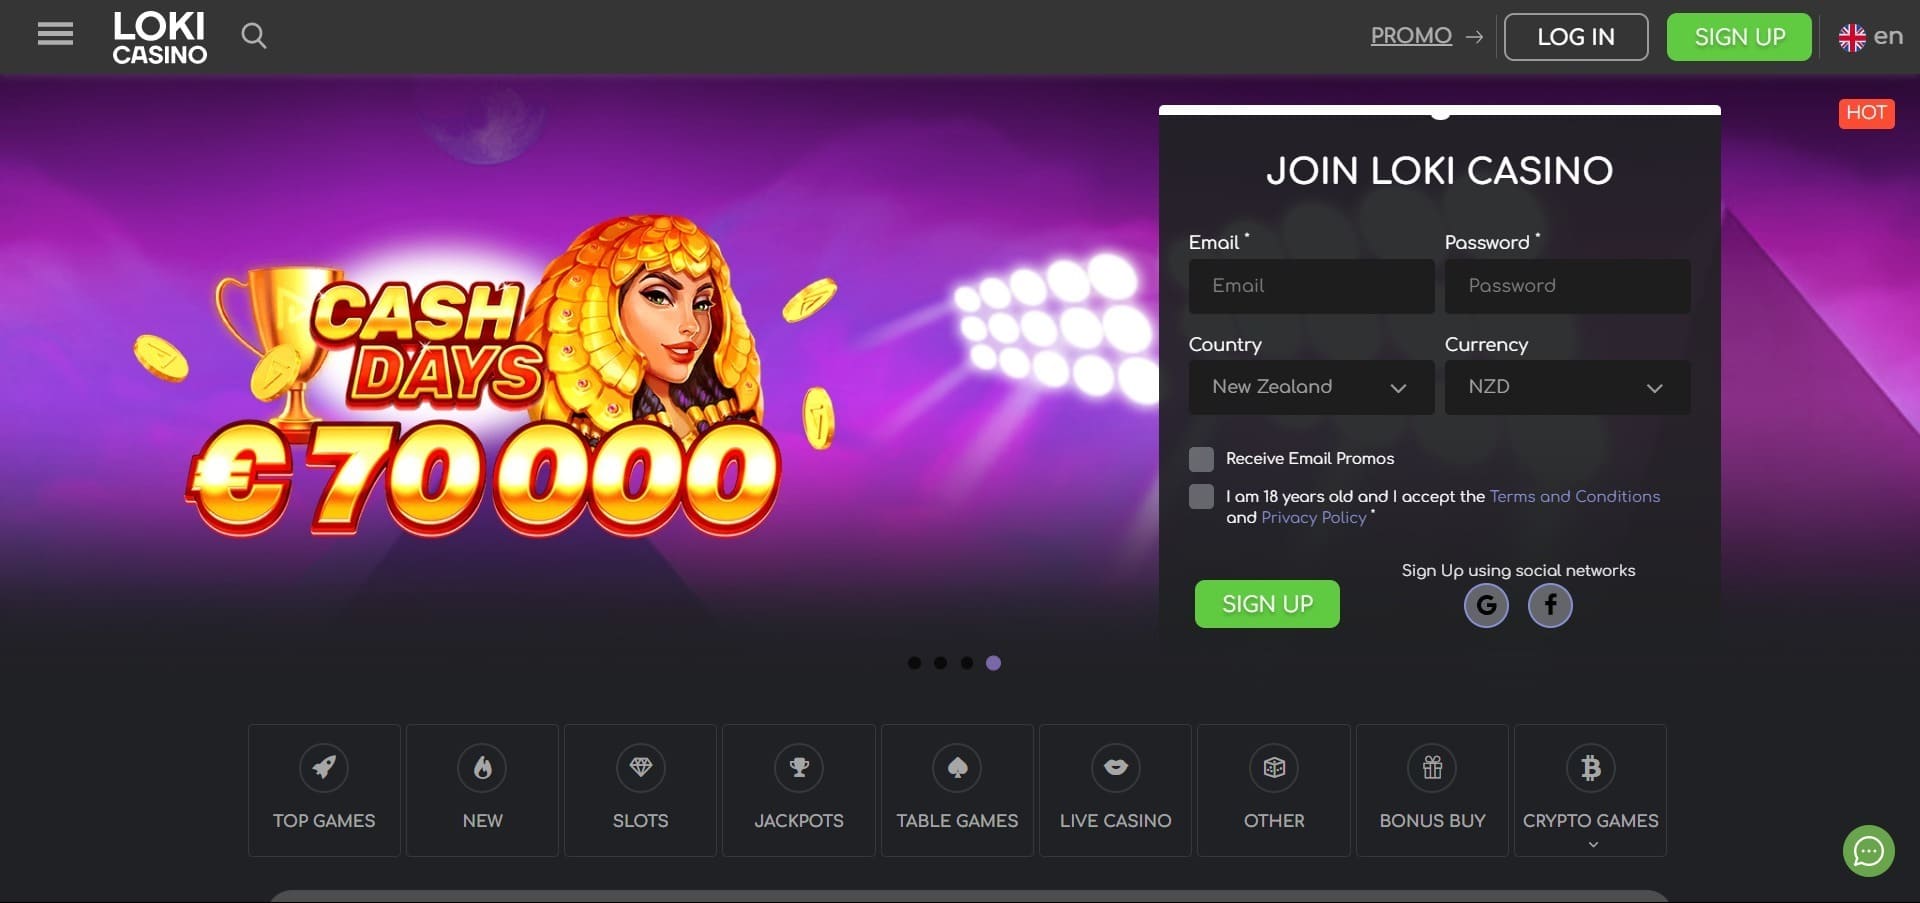 Official website of the Loki Casino